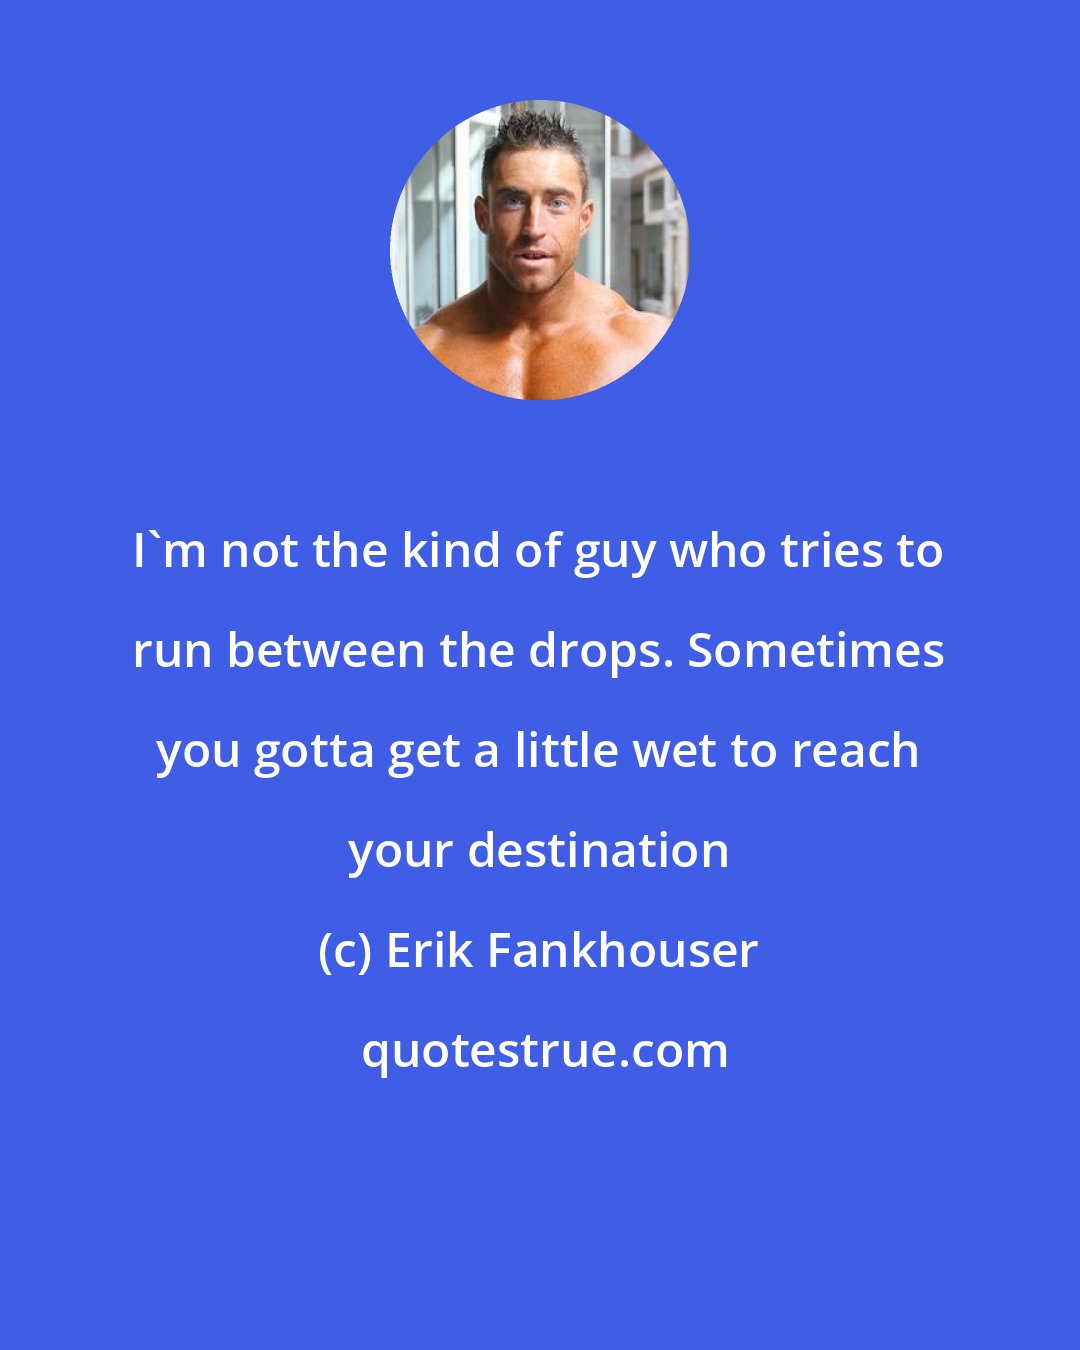 Erik Fankhouser: I'm not the kind of guy who tries to run between the drops. Sometimes you gotta get a little wet to reach your destination